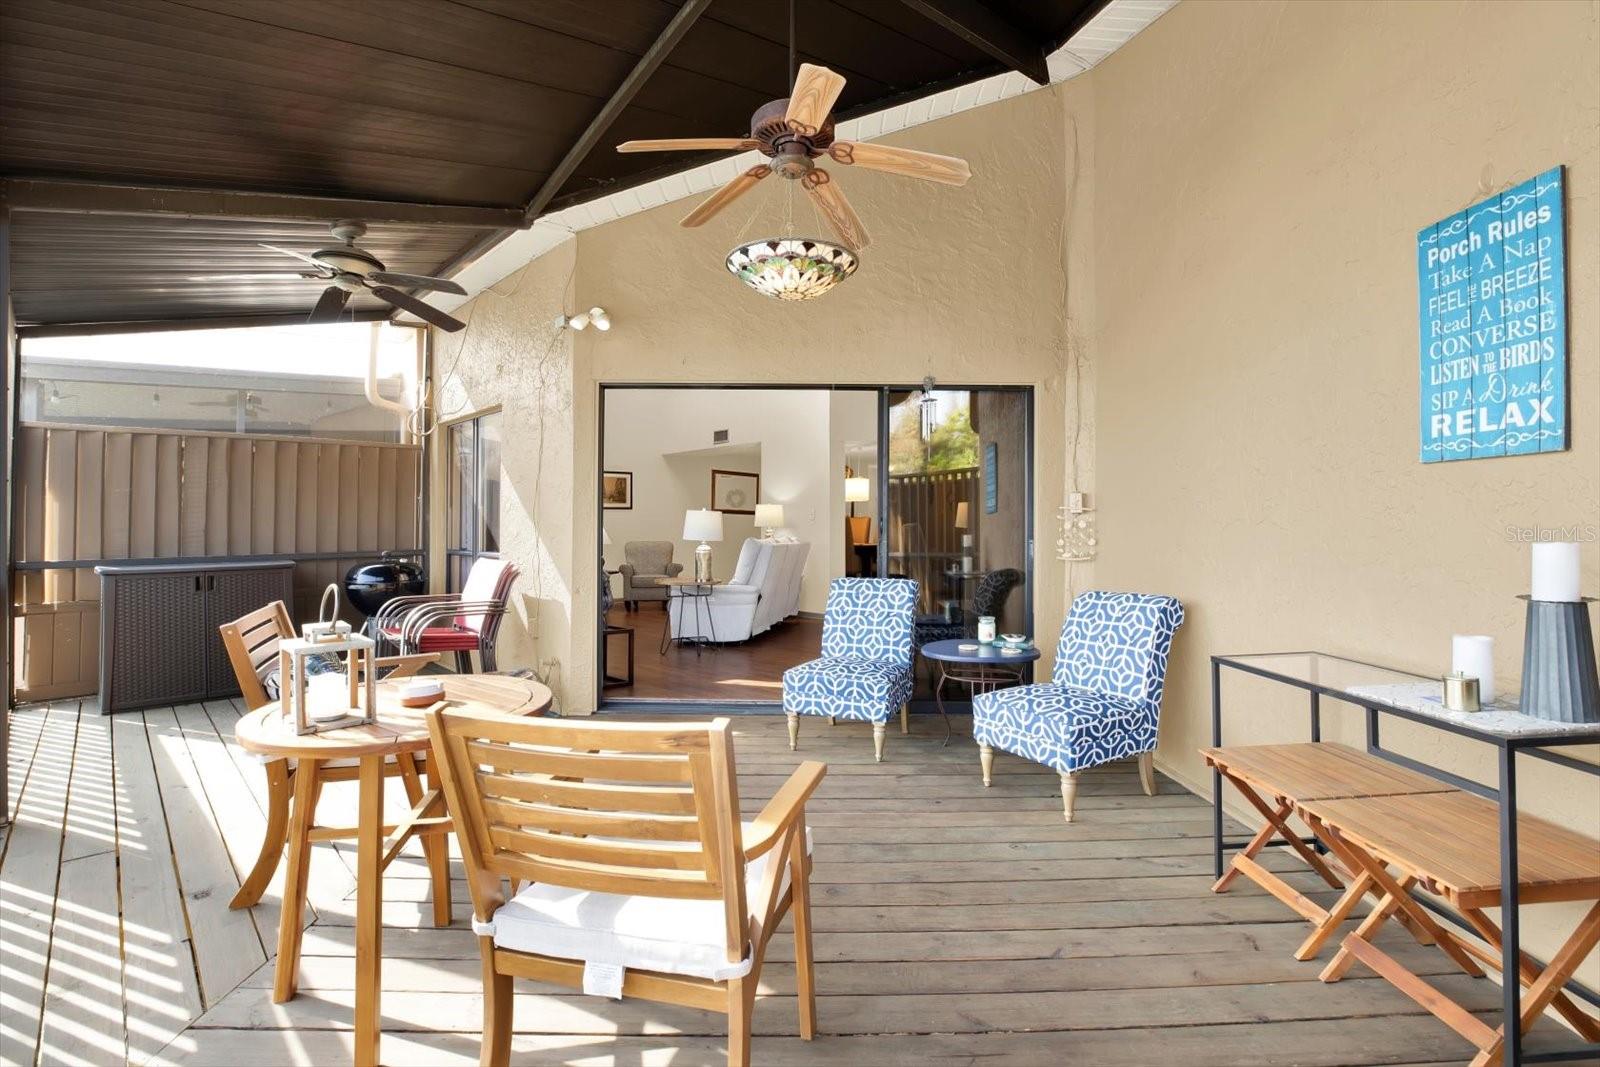 Enjoy the Florida weather on the screened-in porch.